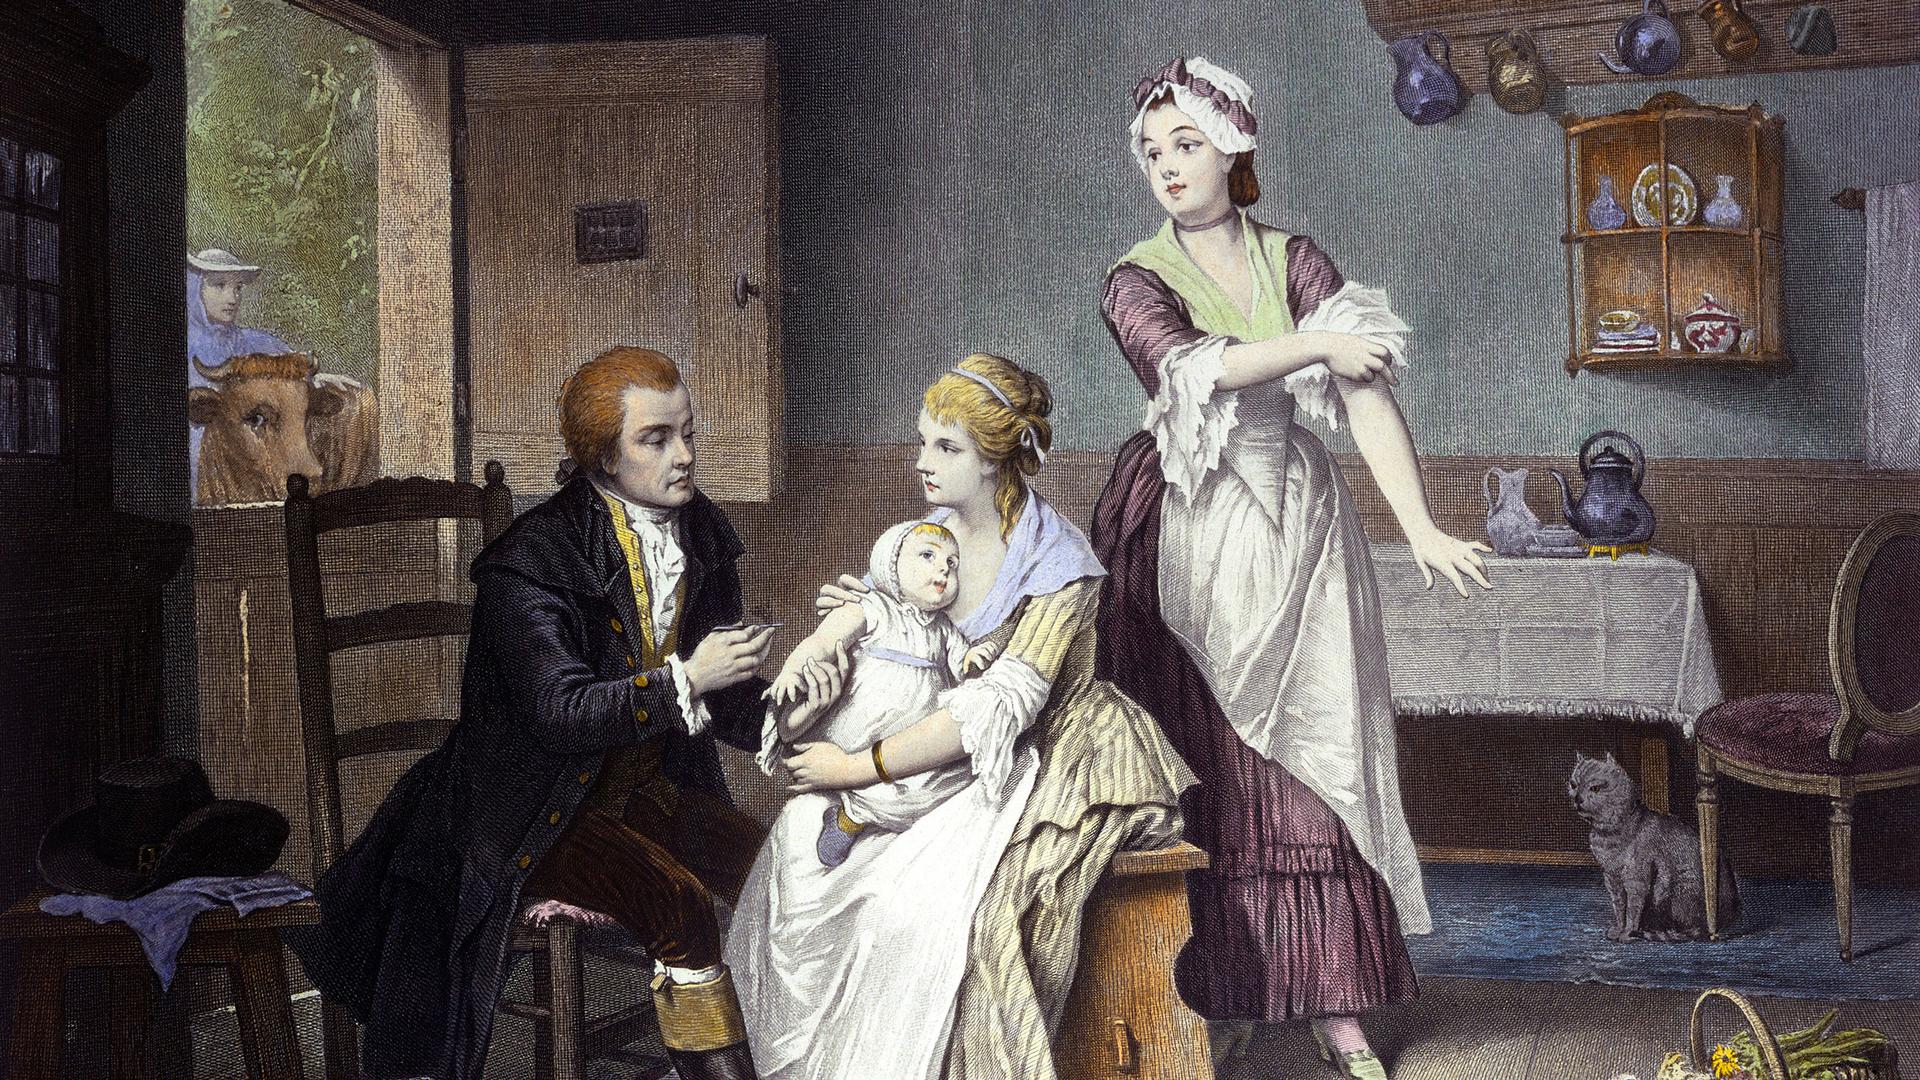 Edward Jenner, vaccinating his young child, held by Mrs. Jenner; a maid rolls up her sleeve, a man stands outside holding a cow. Coloured engraving by C. Manigaud after E Hamman.